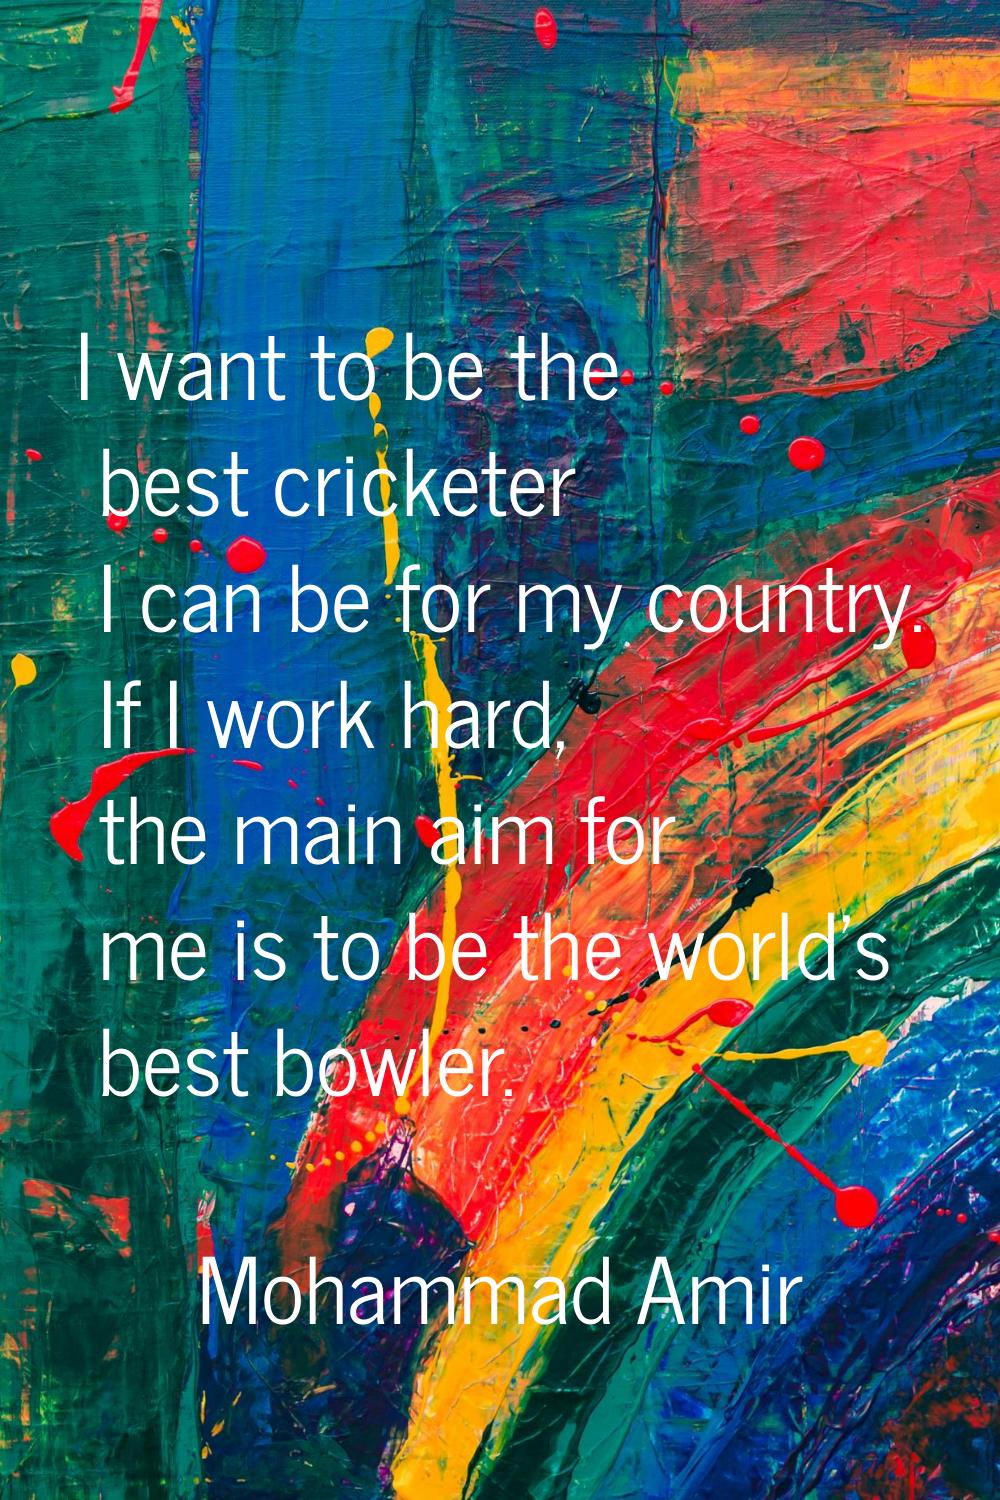 I want to be the best cricketer I can be for my country. If I work hard, the main aim for me is to 